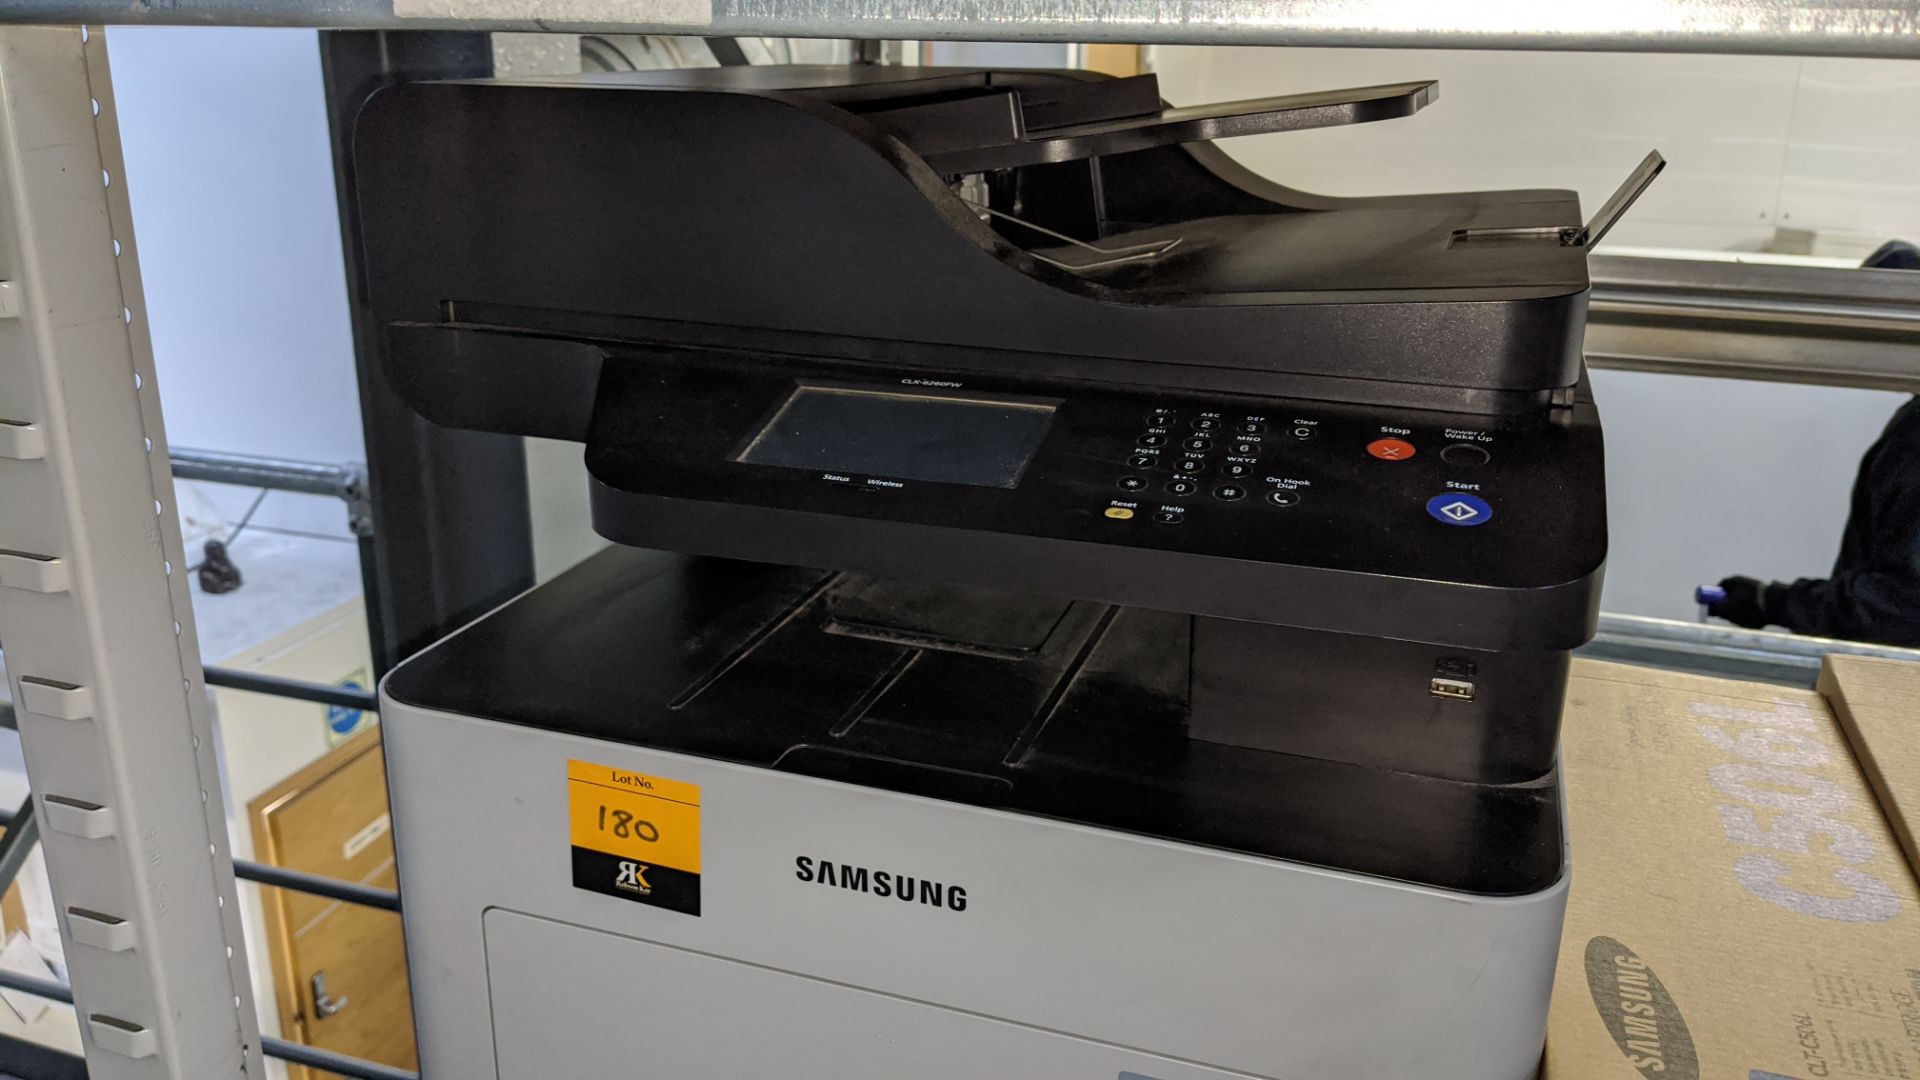 Samsung WIFI multifunction printer model CLX-6260FW Please note, lots 1 - 200 are located at - Image 15 of 15